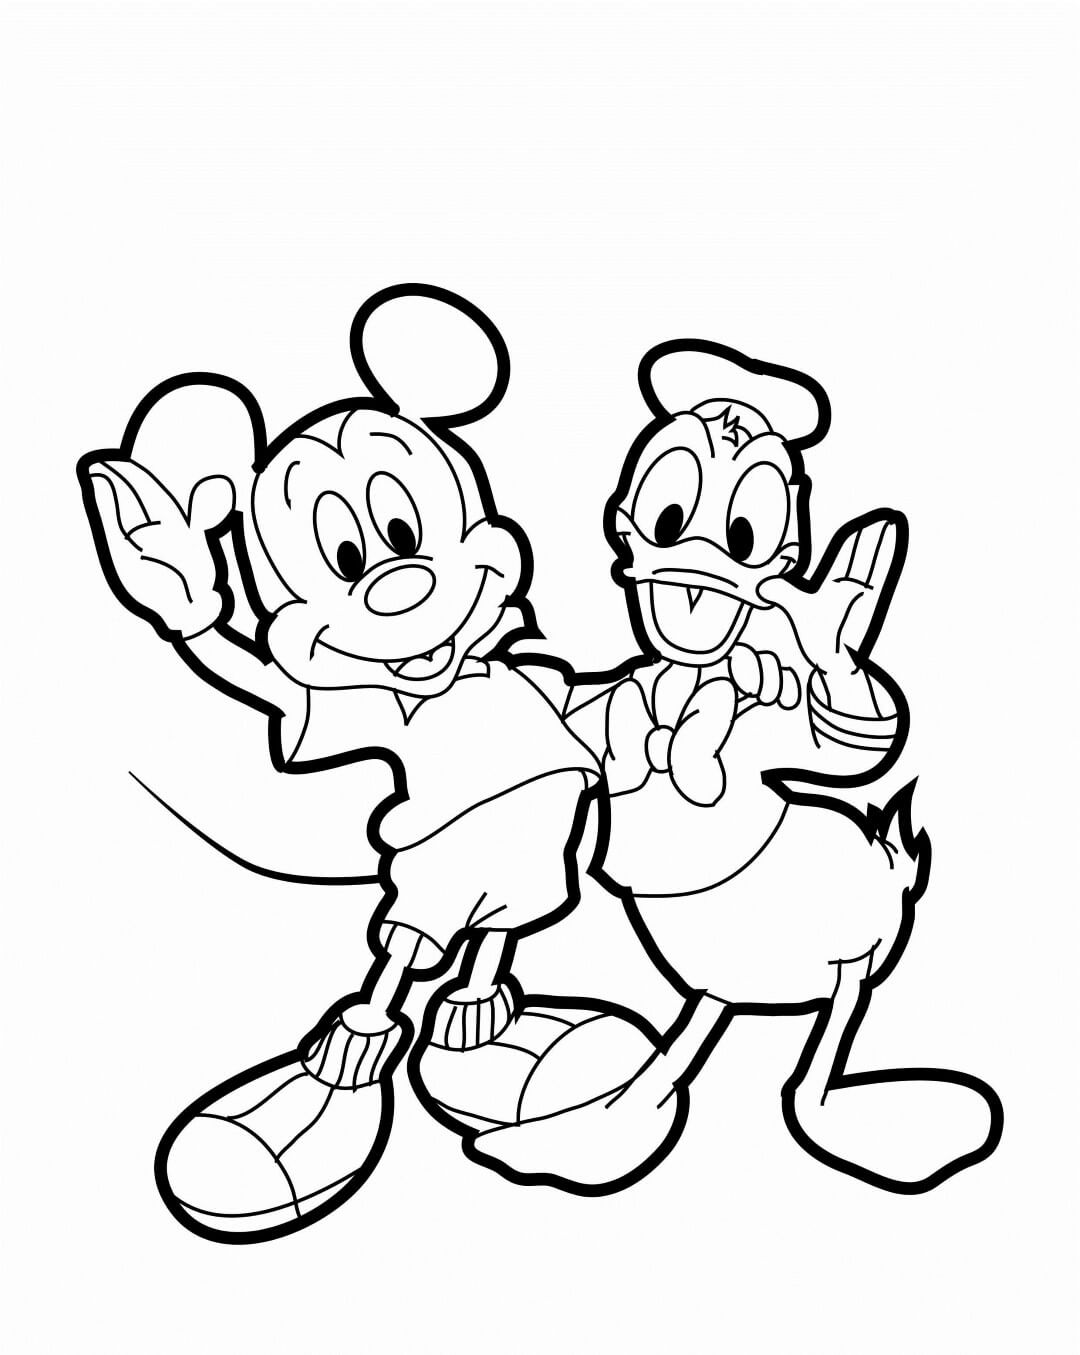 Mickey and Donald Friends Coloring Page